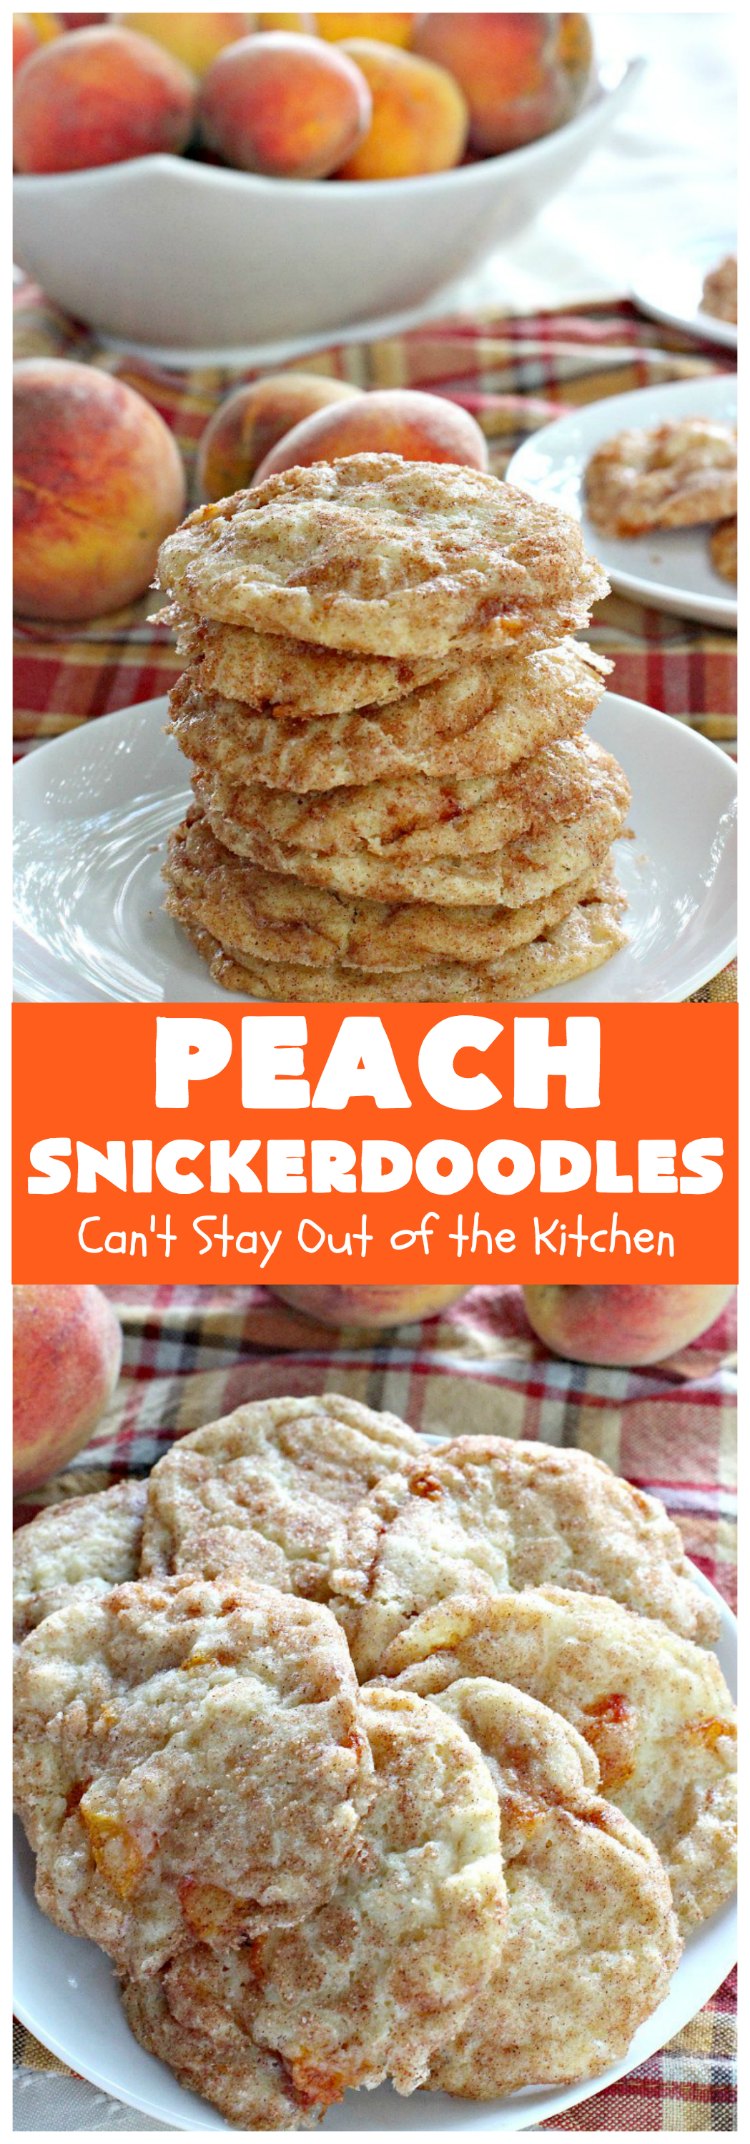 Peach Snickerdoodles | Can't Stay Out of the Kitchen